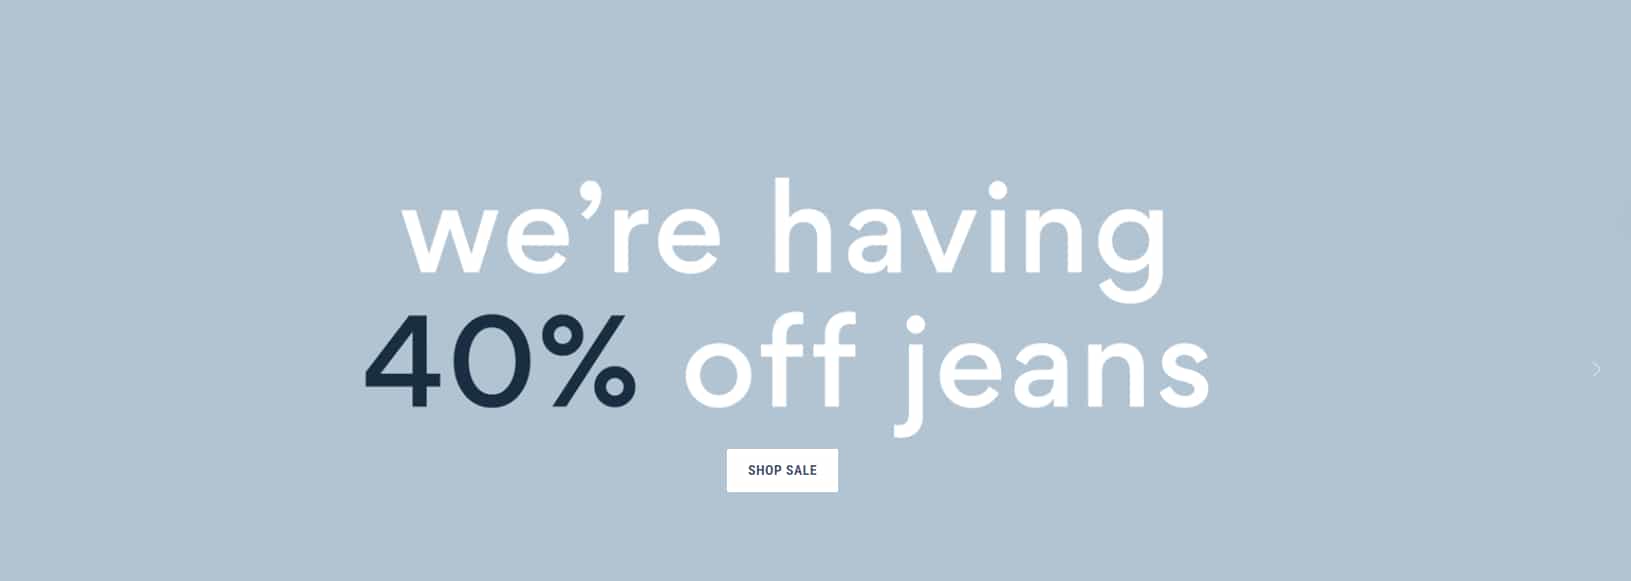 Riders By Lee Cyber Monday Offer: 40% OFF Jeans, Free delivery